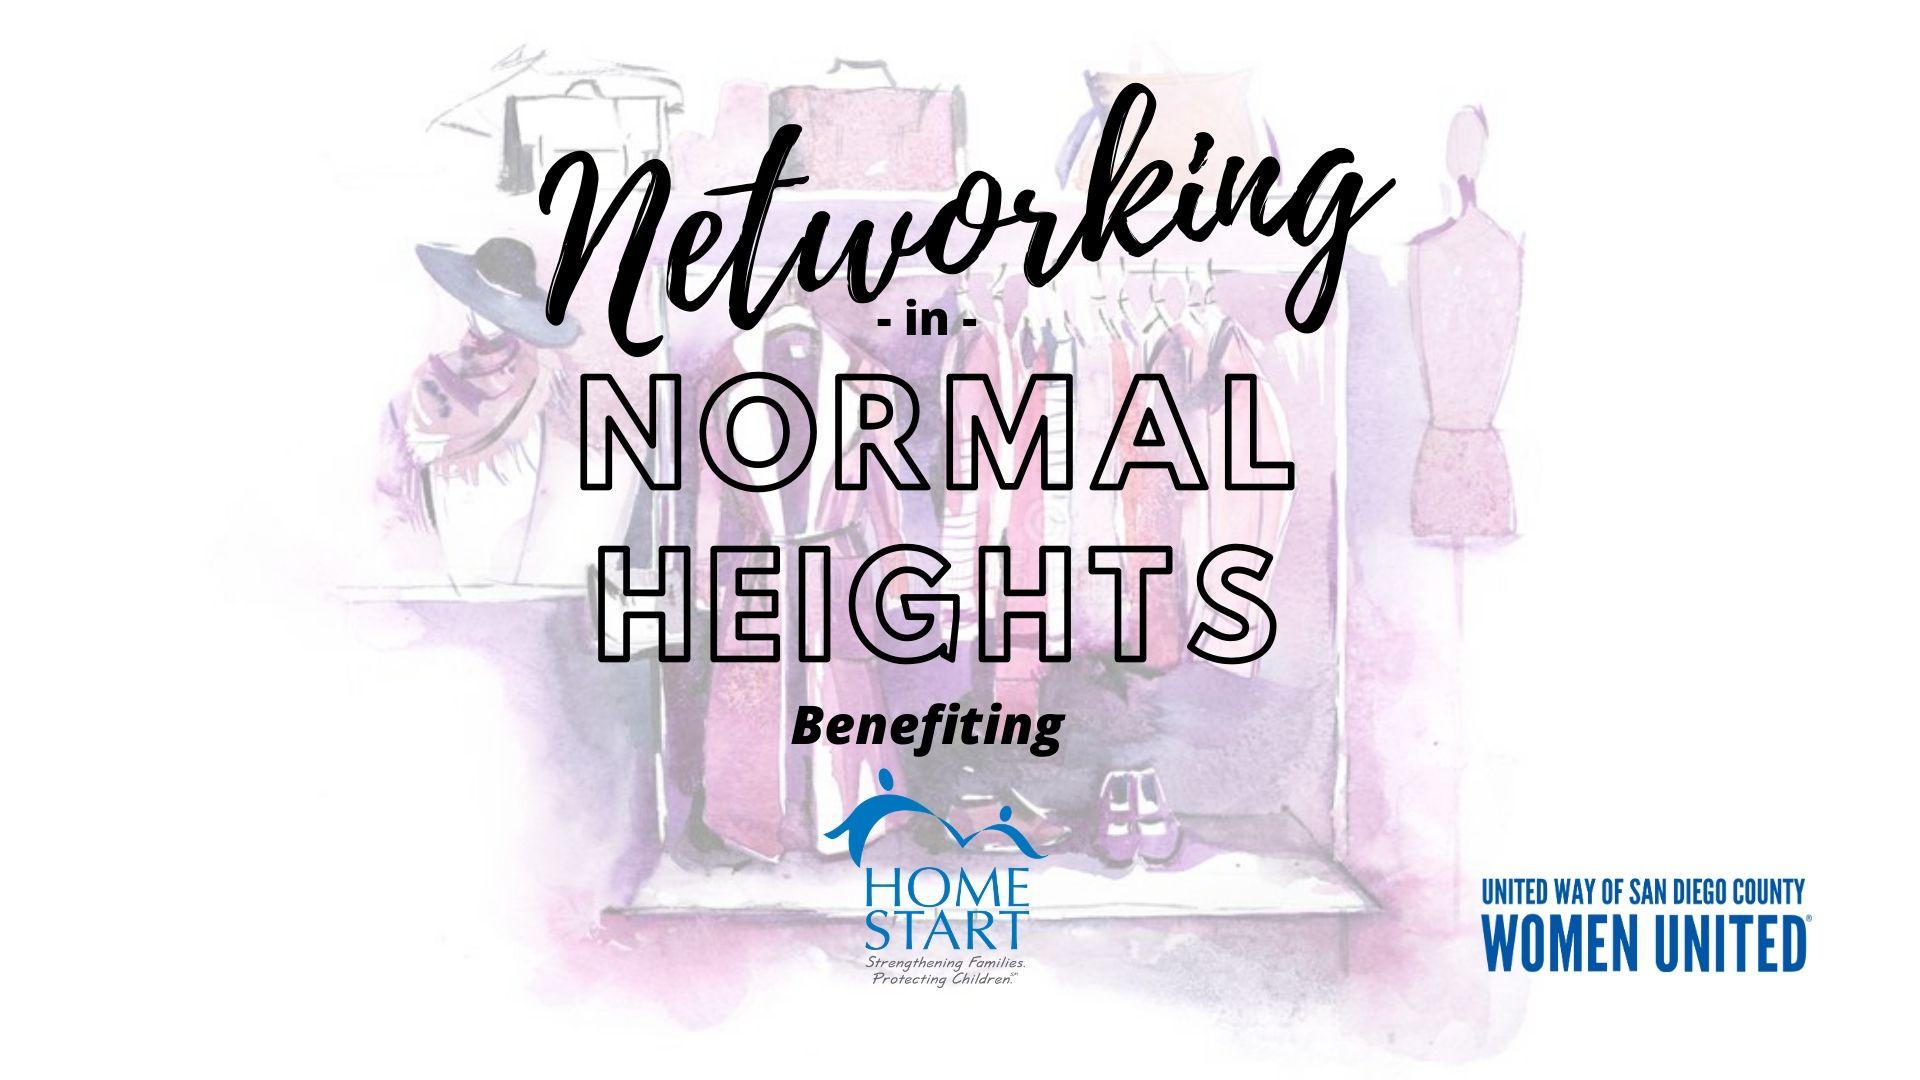 Networking in Normal Heights